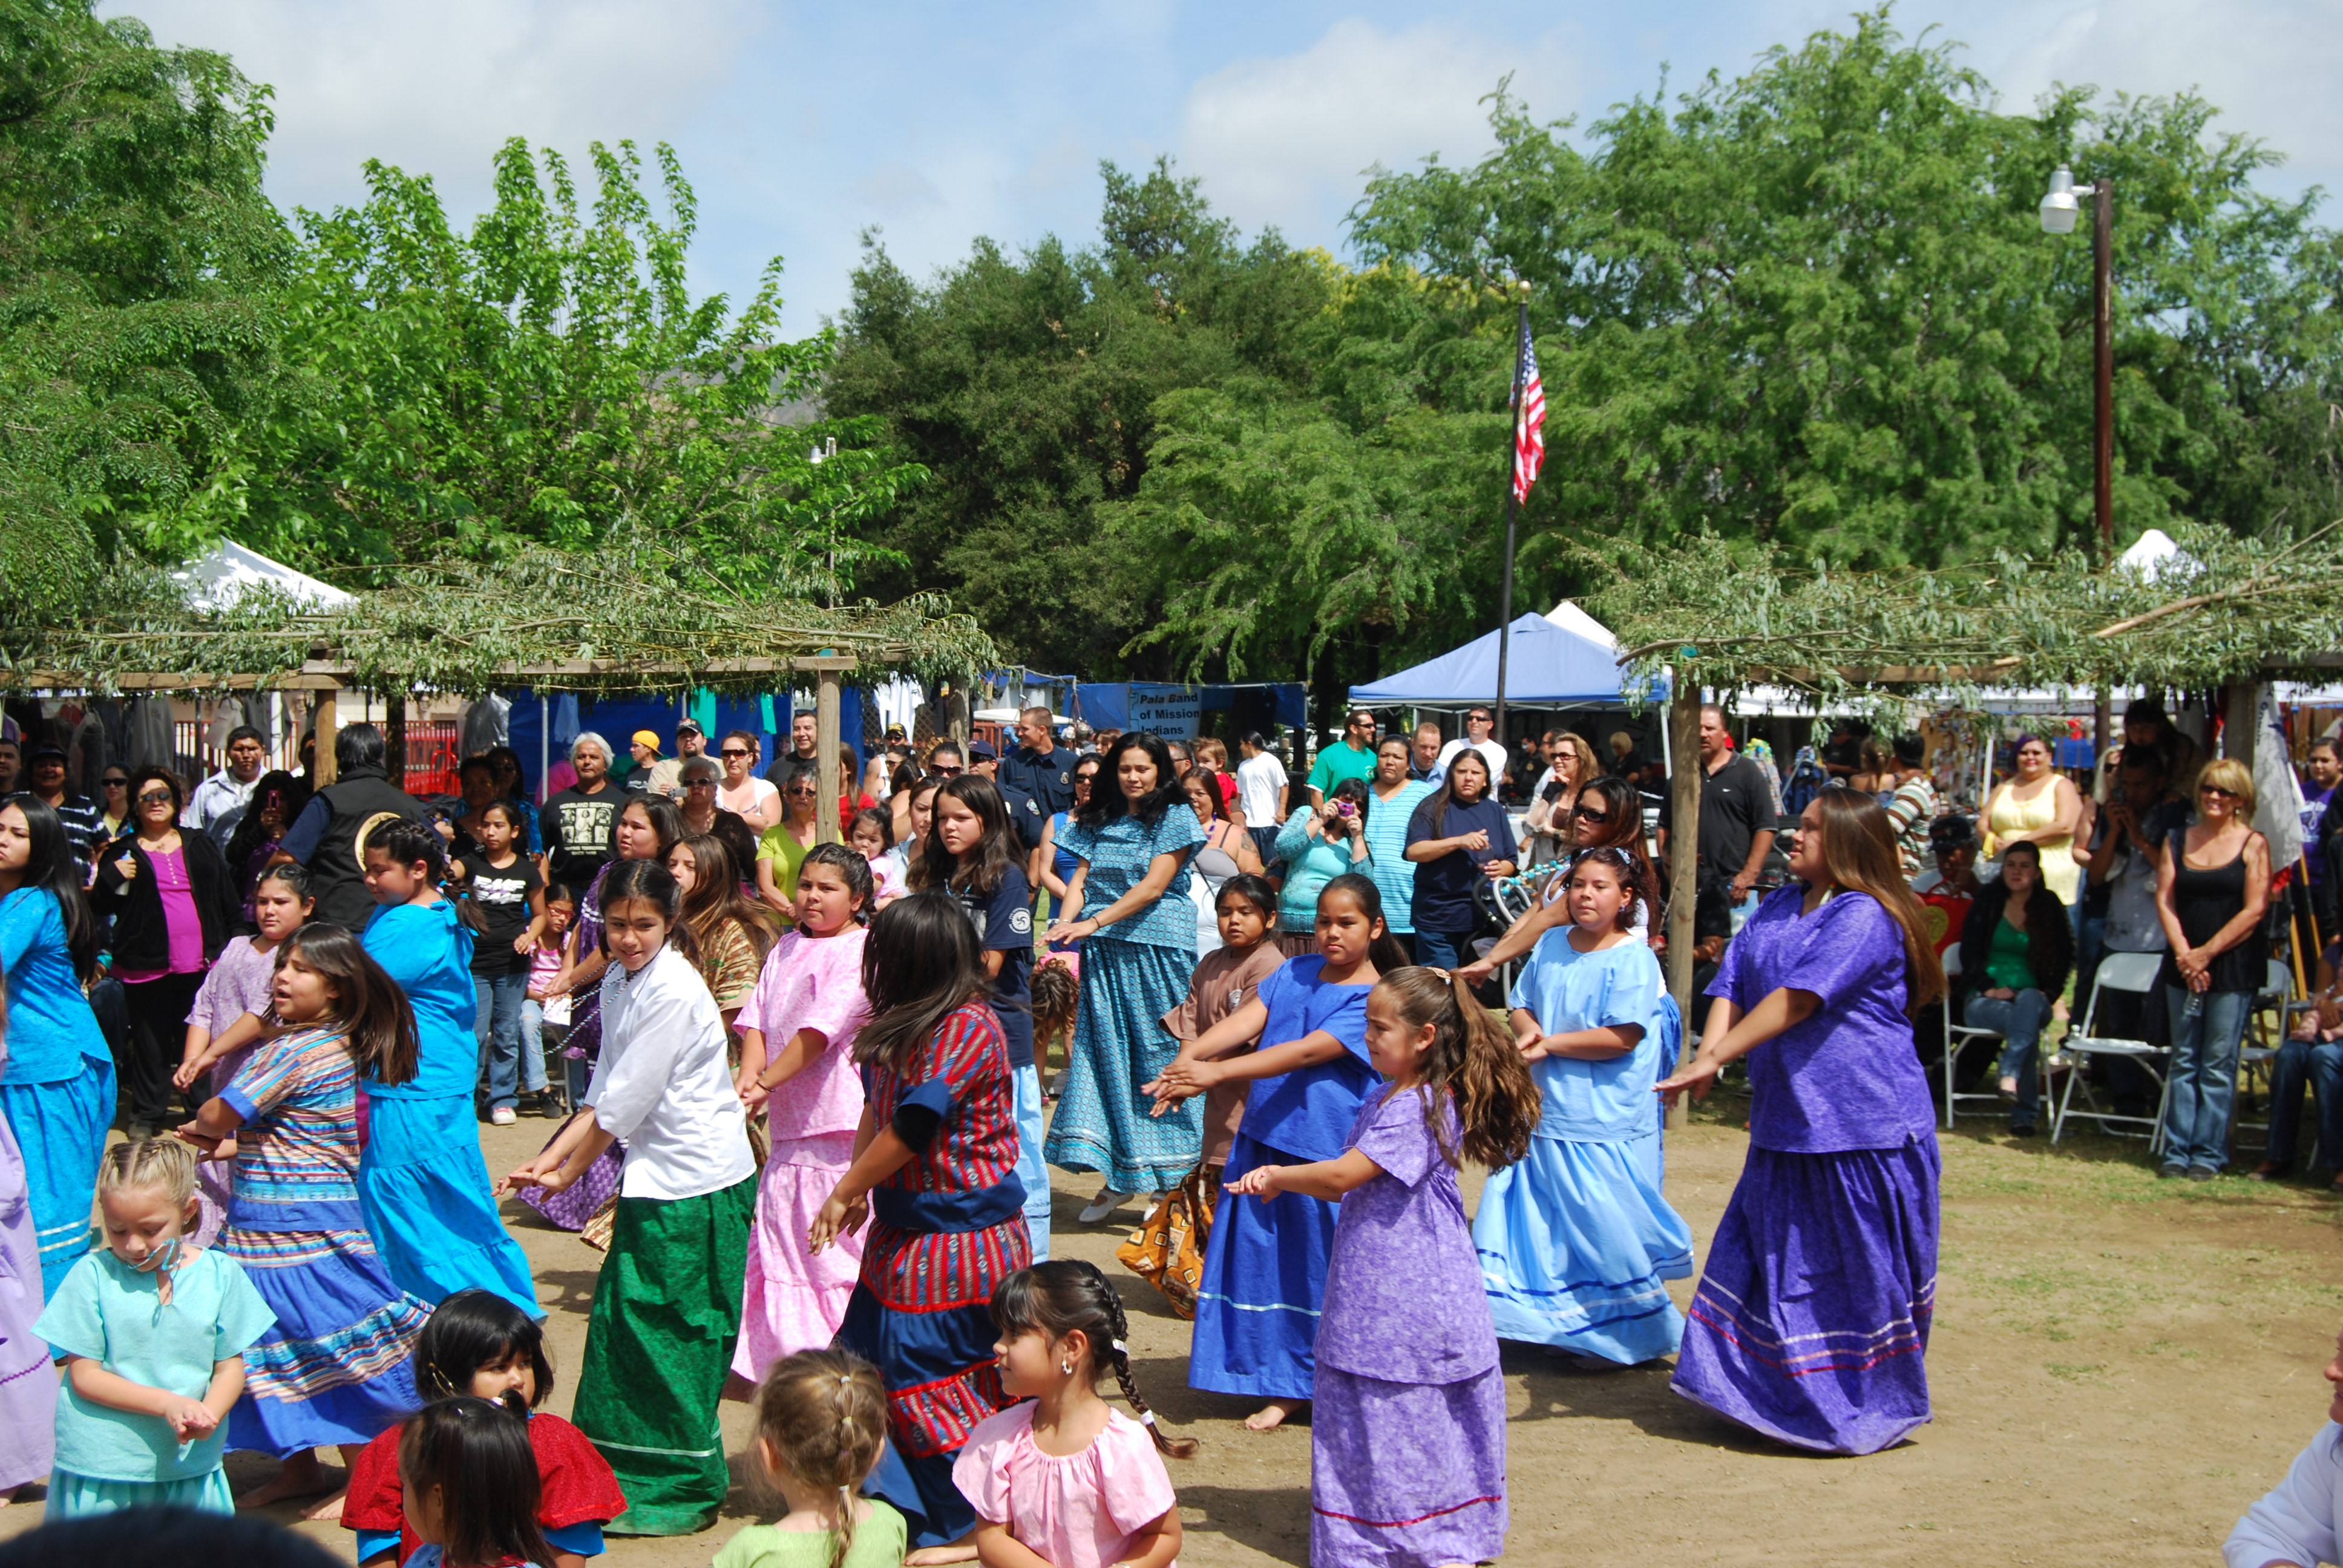 Women and girls in colorful dresses dancing in a circle surrounded by traditional ramadas (awnings made of foliage) and modern festival booths